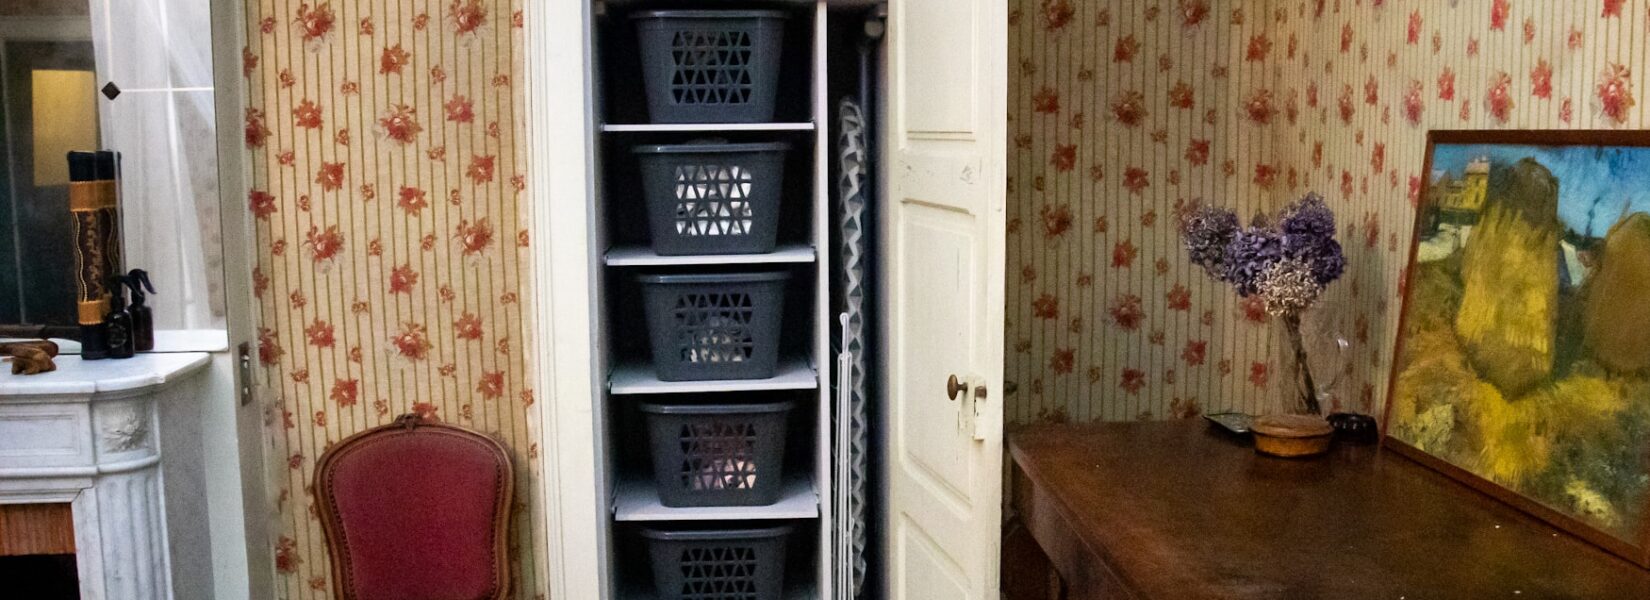 Creating a laundry sorting station in an old wardrobe